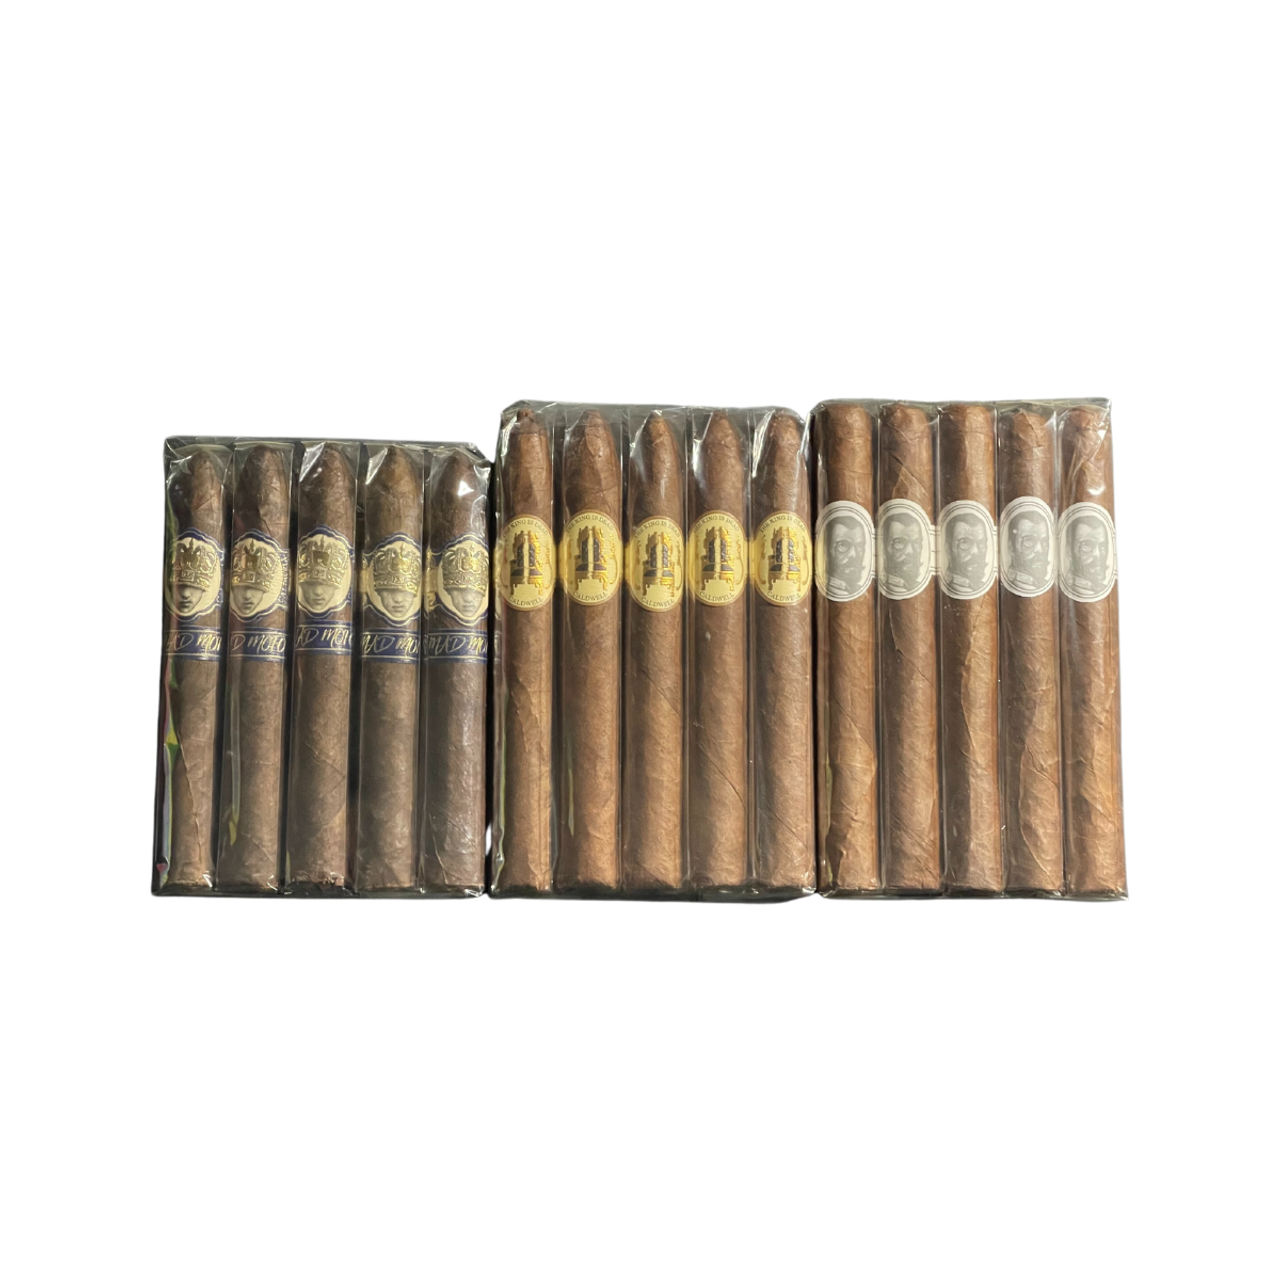 Get 5 each of the following: Caldwell Long Live The King Mad Mofo Belicoso Maduro, Caldwell The King is Dead Last Payday Torpedo, and Caldwell Limited Editon Last Tsar Toro from cigarsamplers.com with FREE shipping!